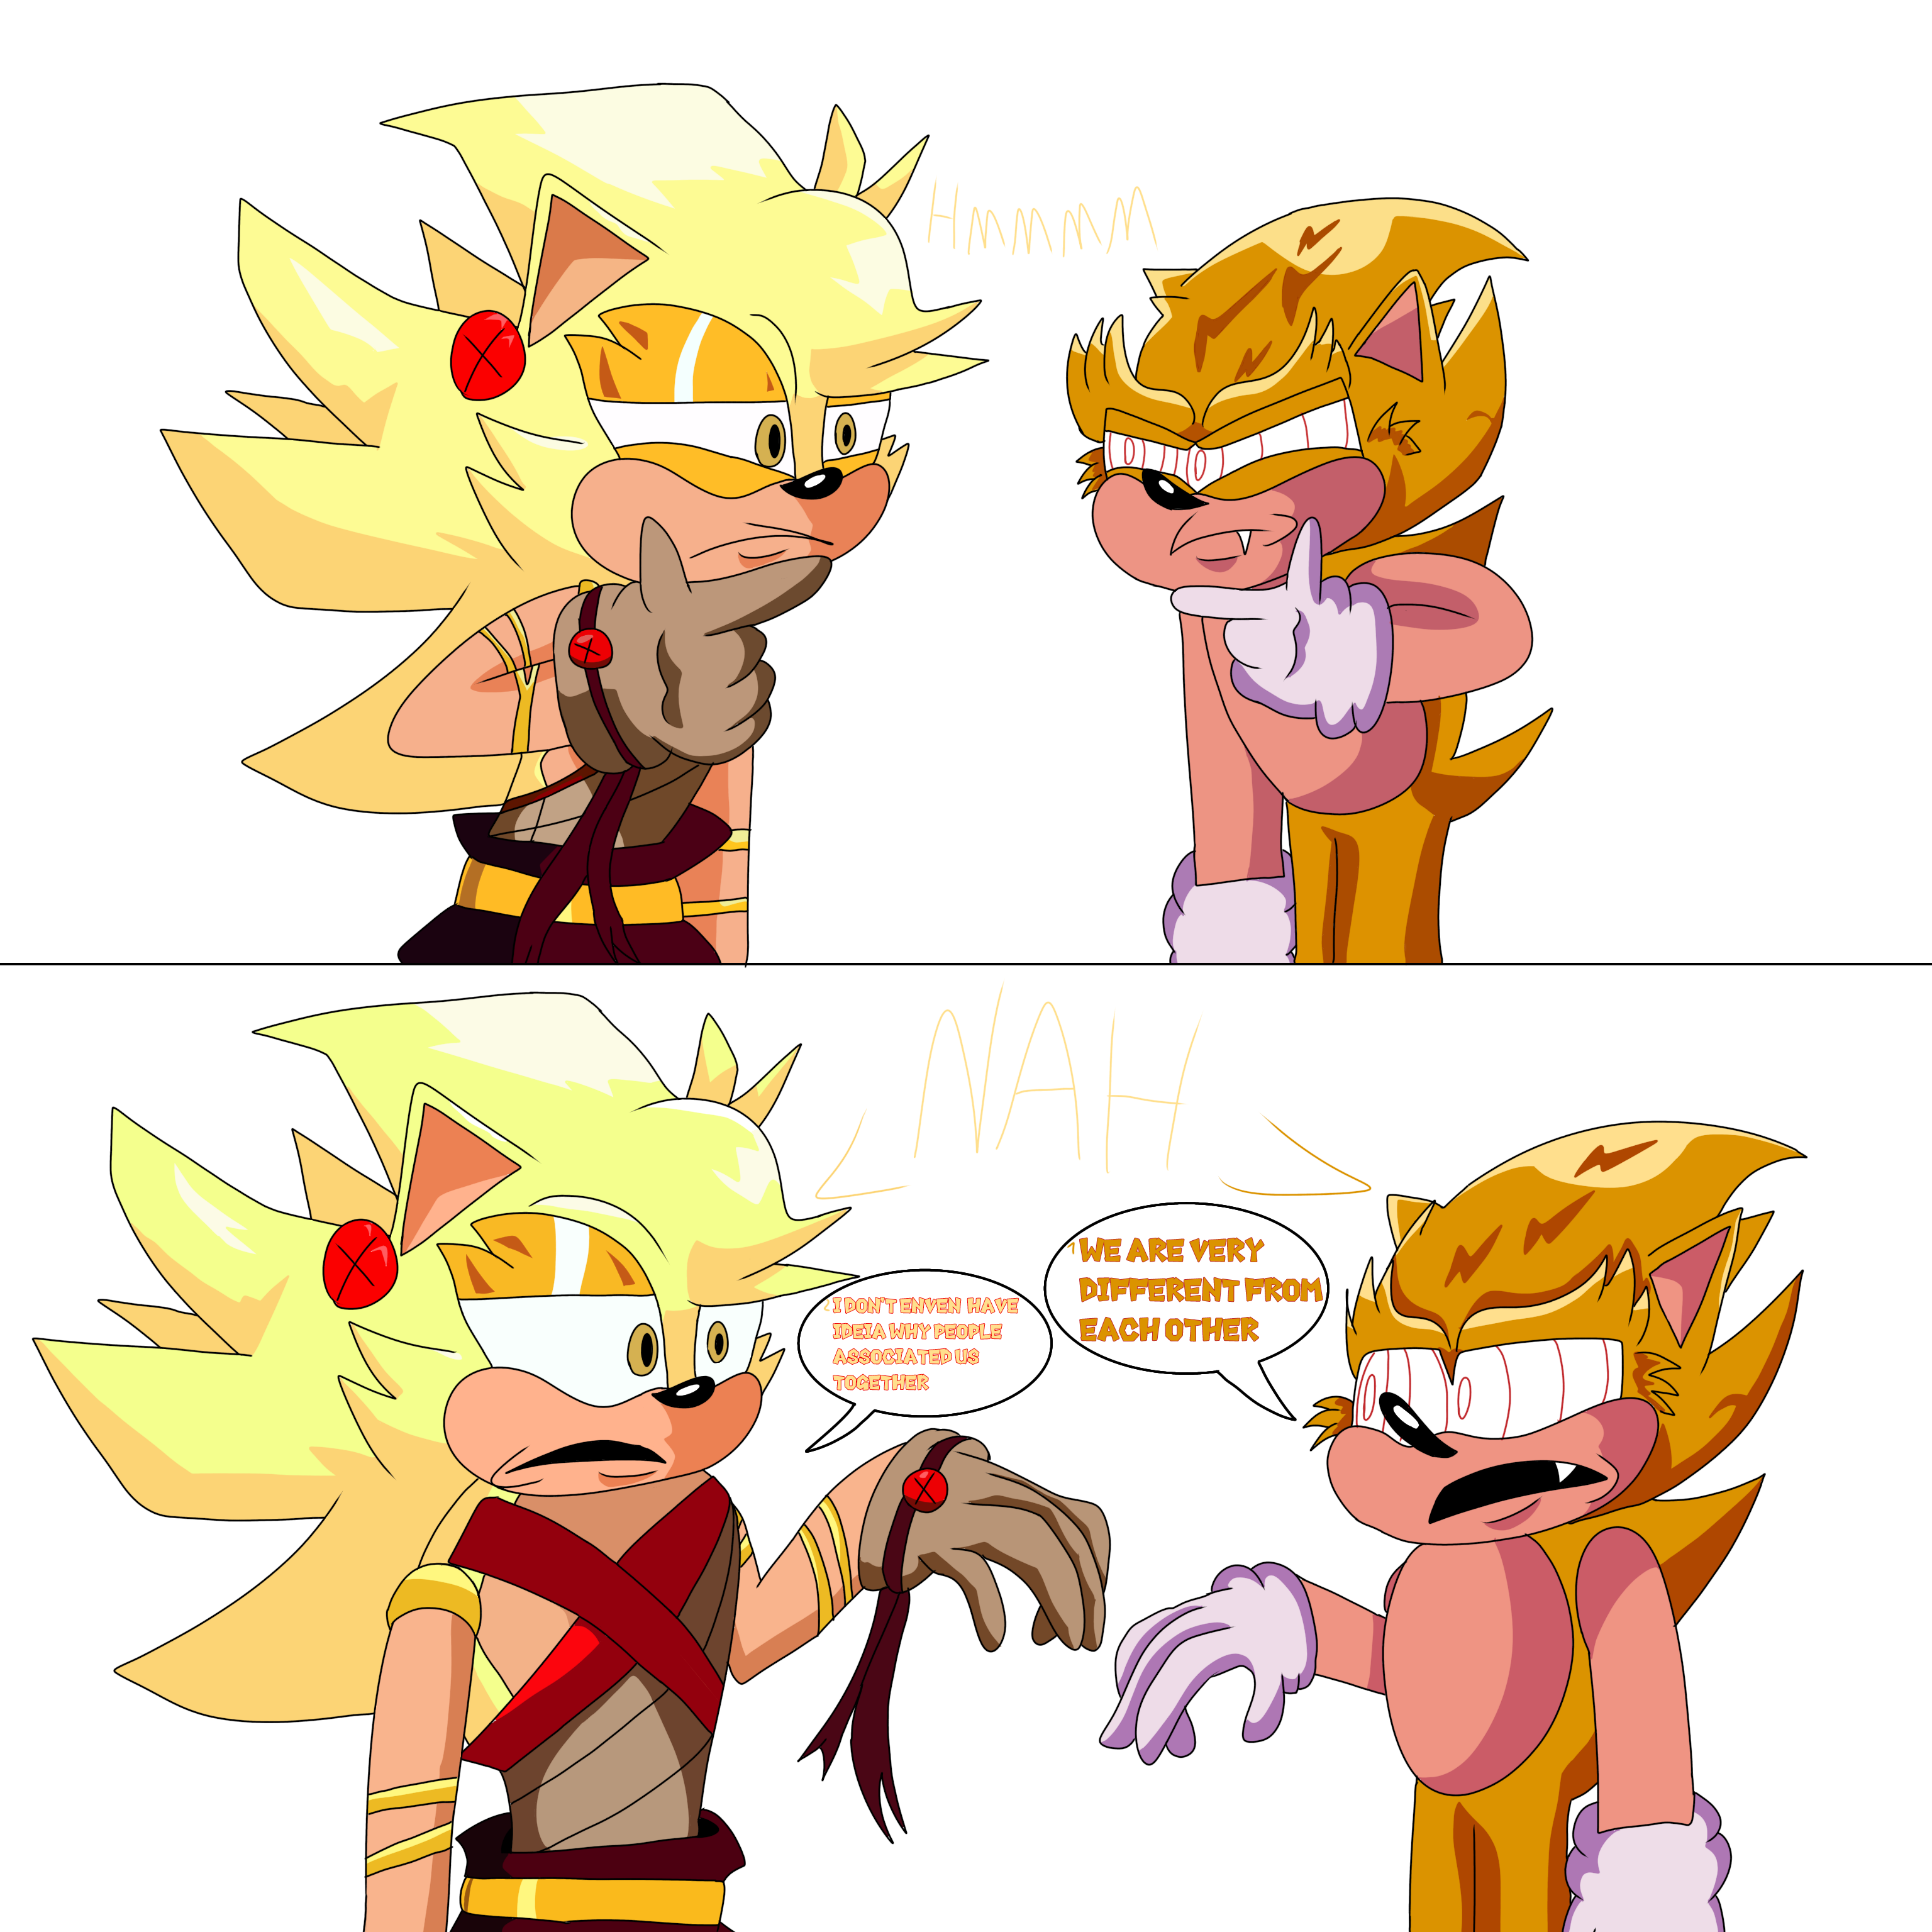 Exes meeting Lord X's Guardians 7. by LucasLRDS0407 on DeviantArt